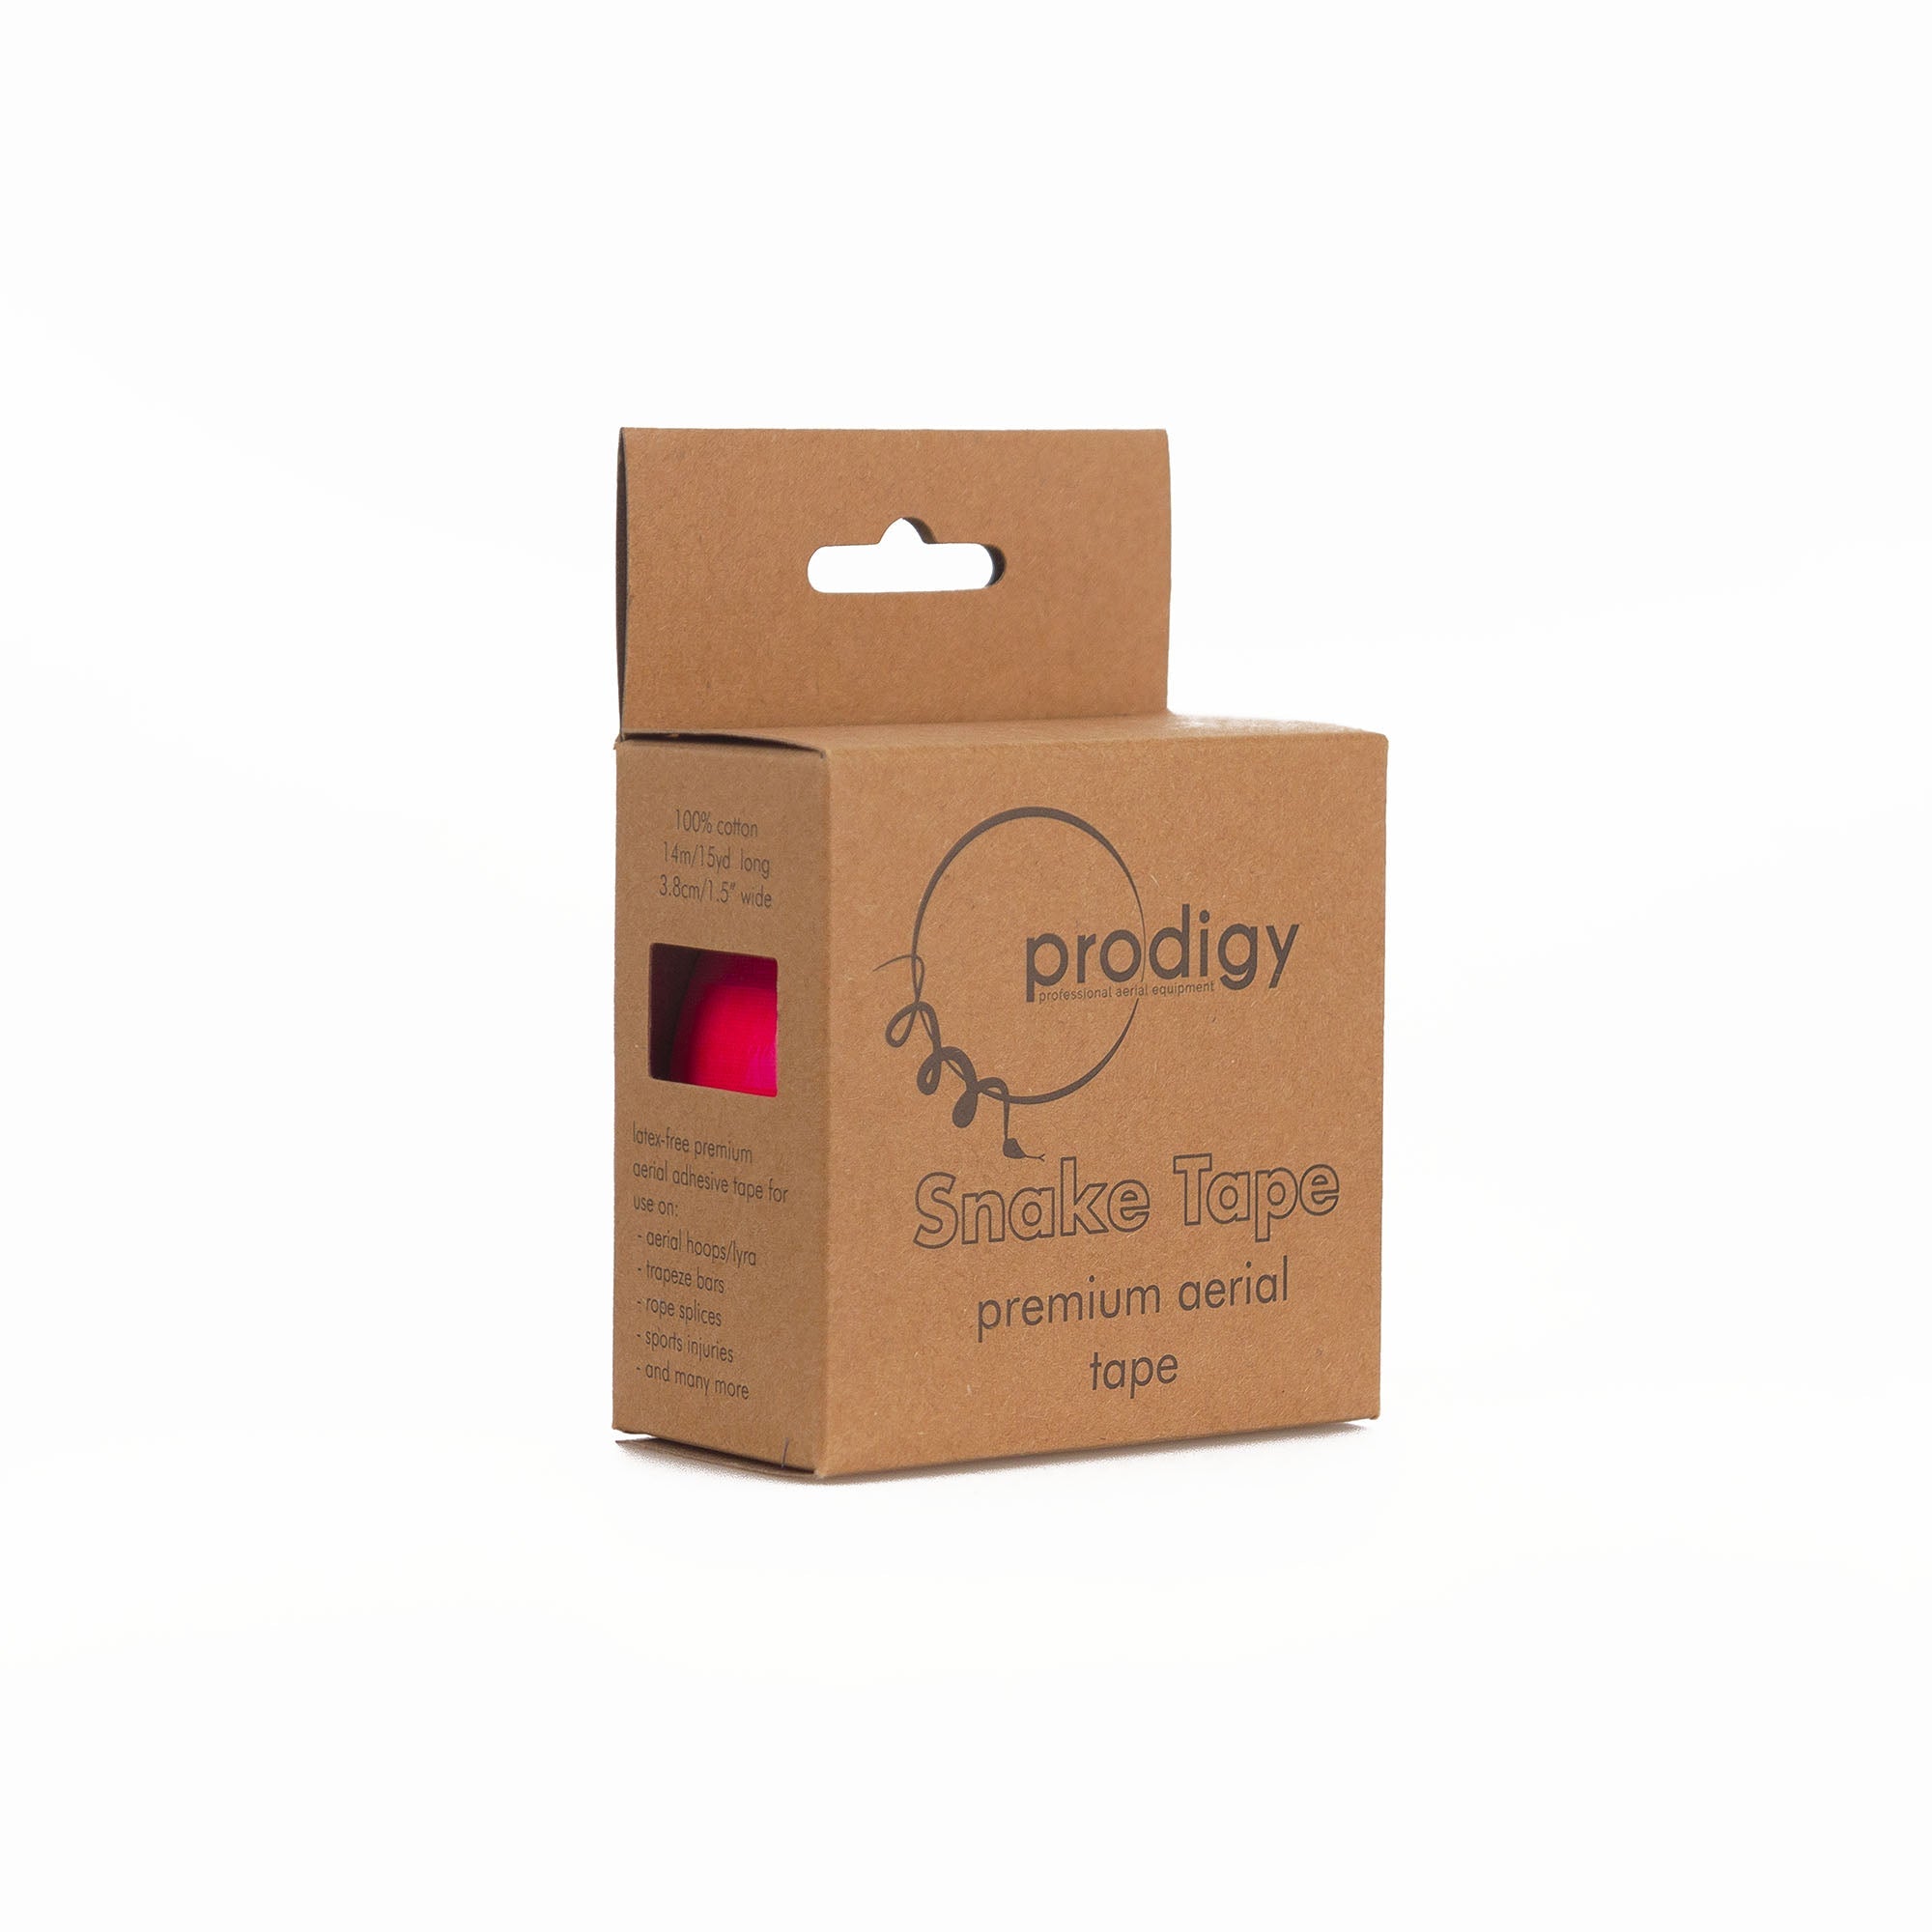 Prodigy snake tape red in box